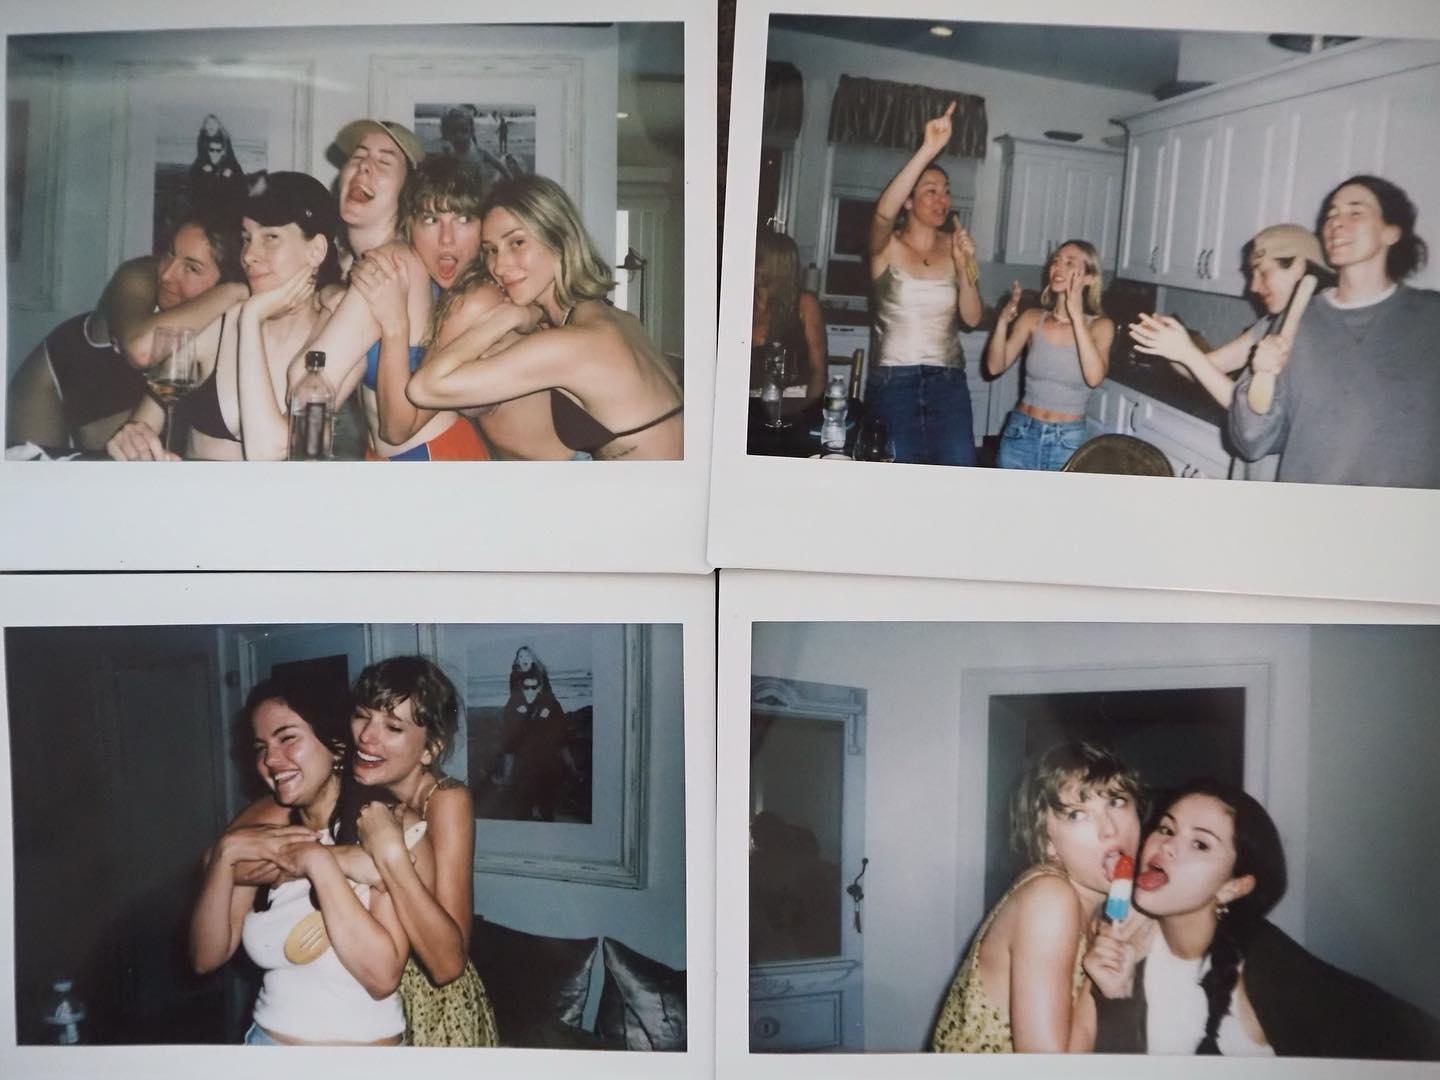 Taylor Swift celebrates Independence Day with friends